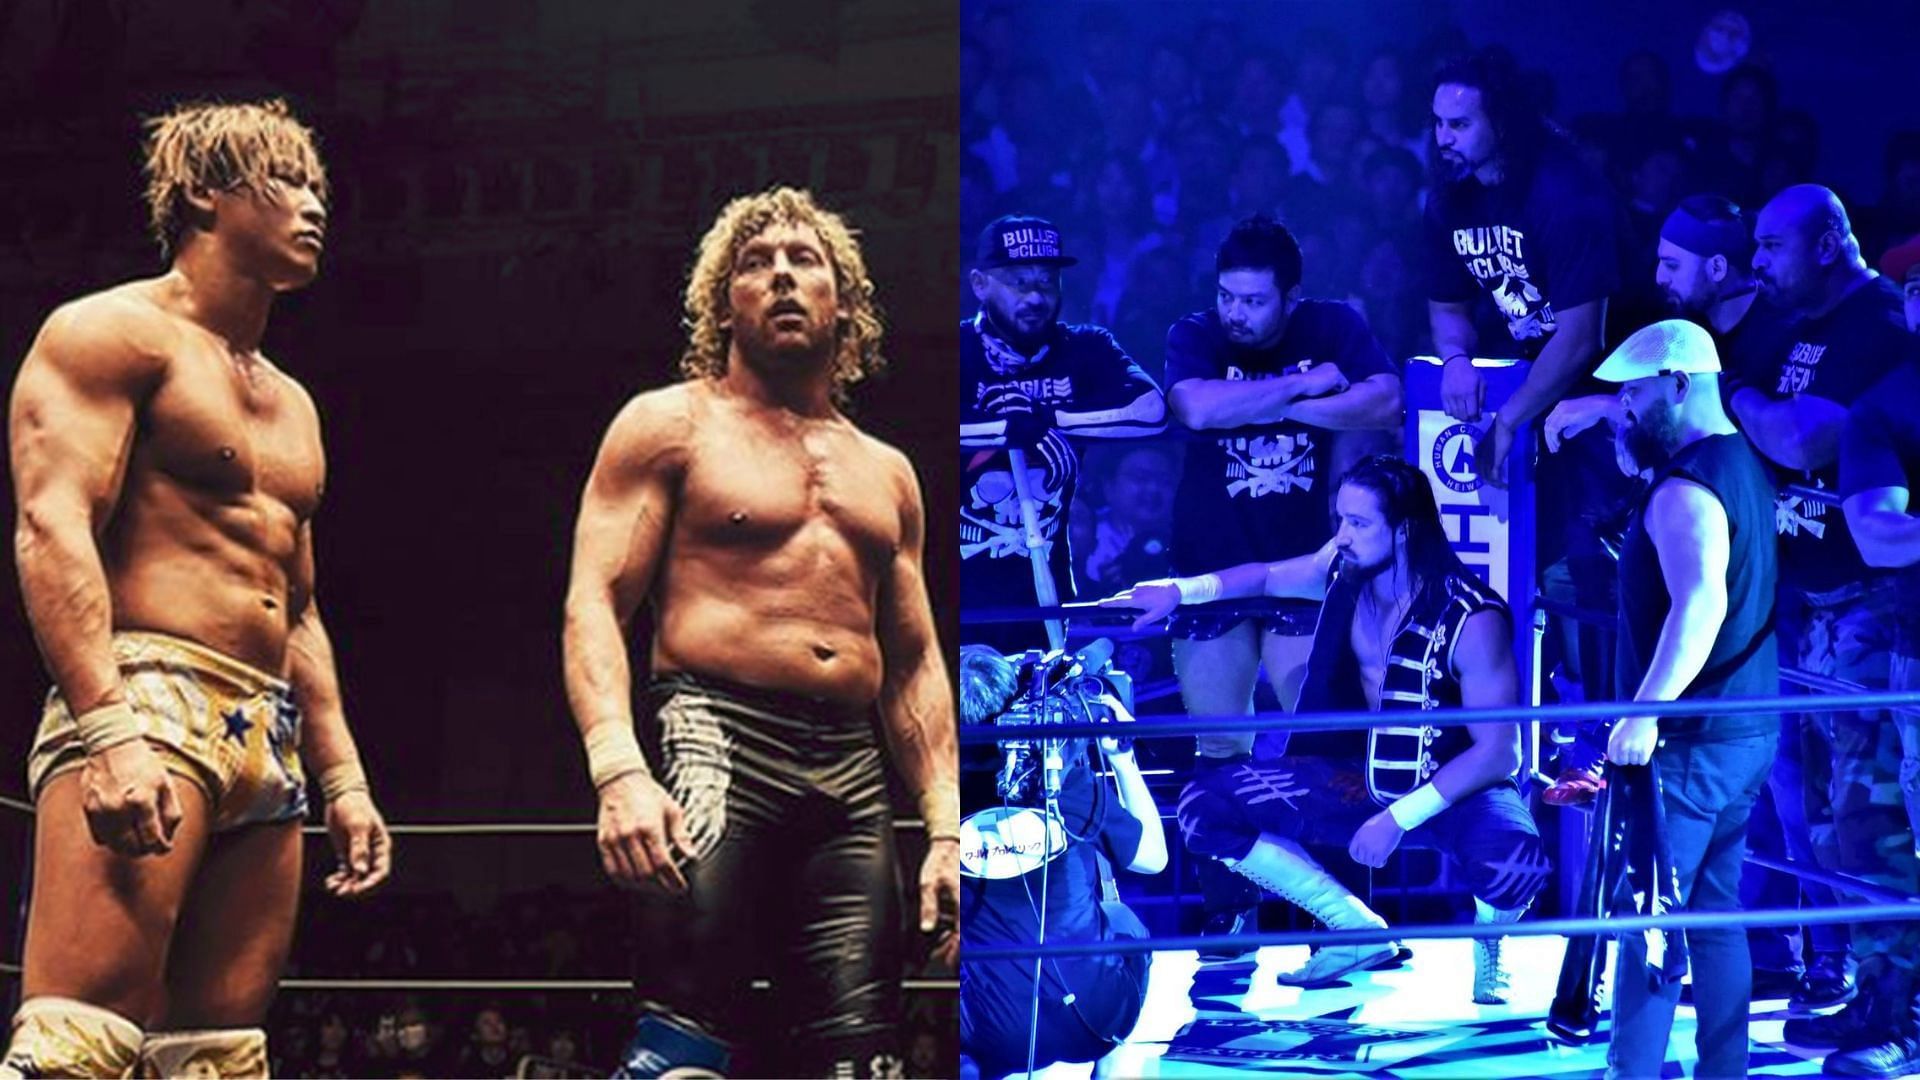 WWE has a lot of Bullet Club influence within the company